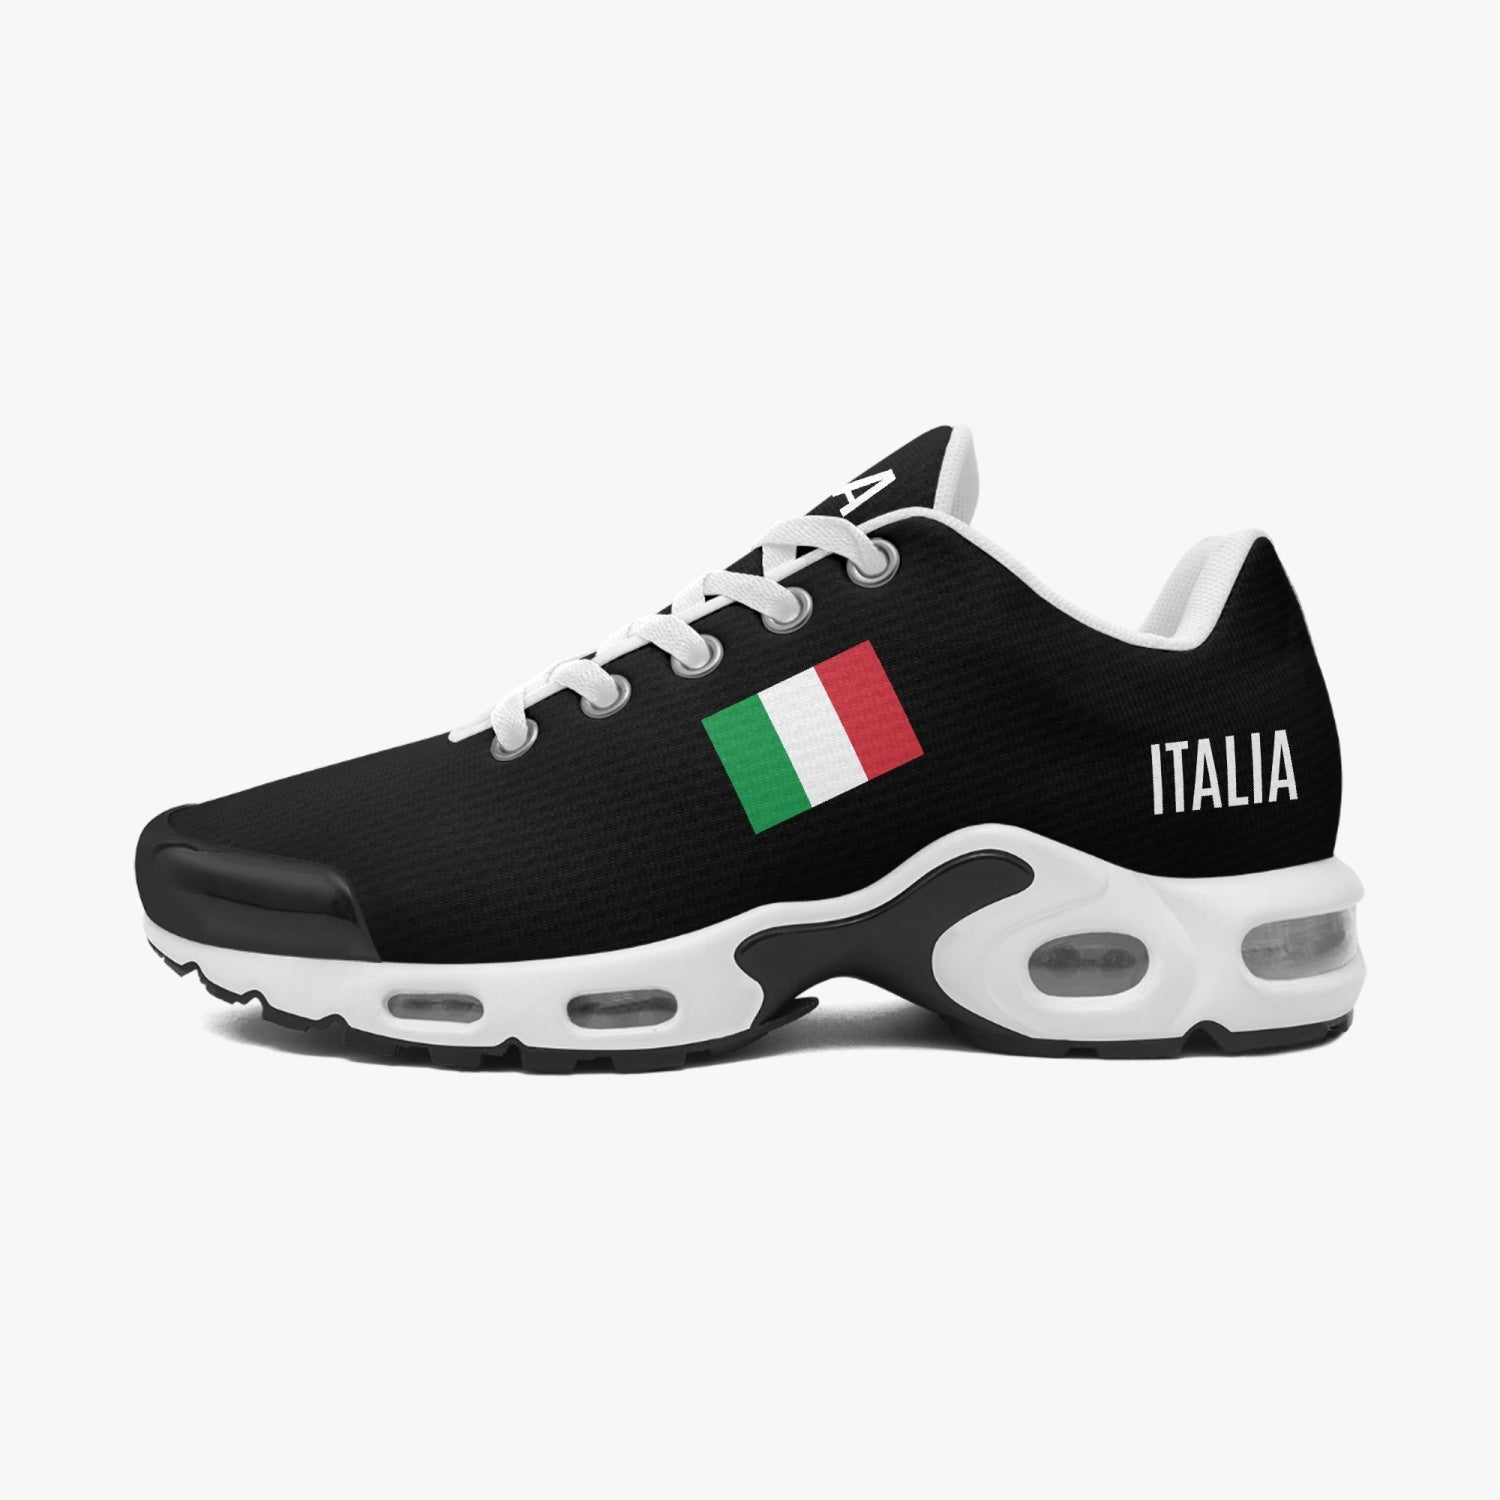 Italian Sneakers: Inspired Designs for Every Step